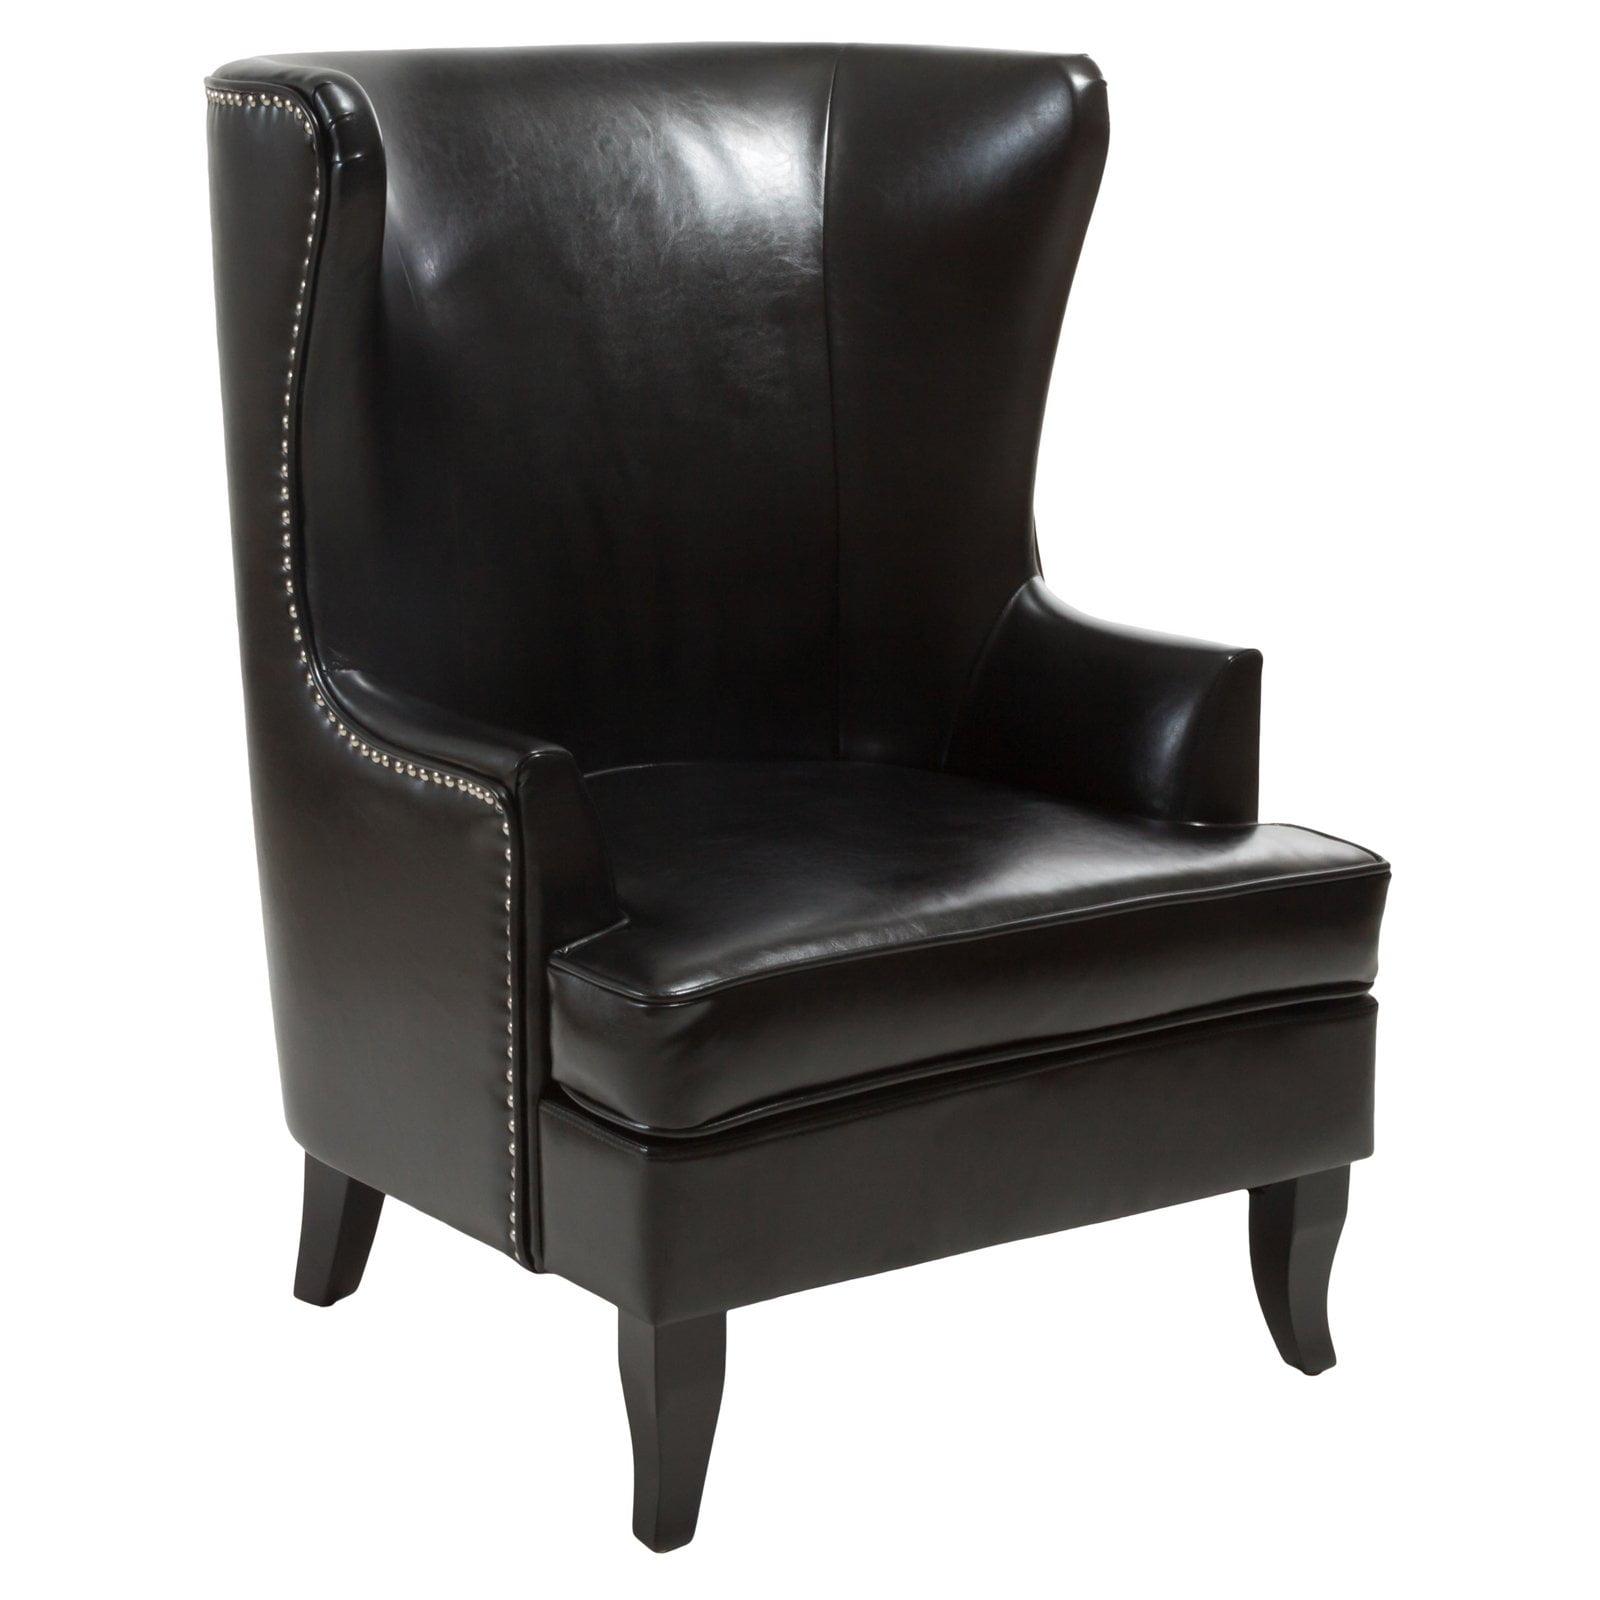 Canterburry High-Back Black Leather Wingback Club Chair